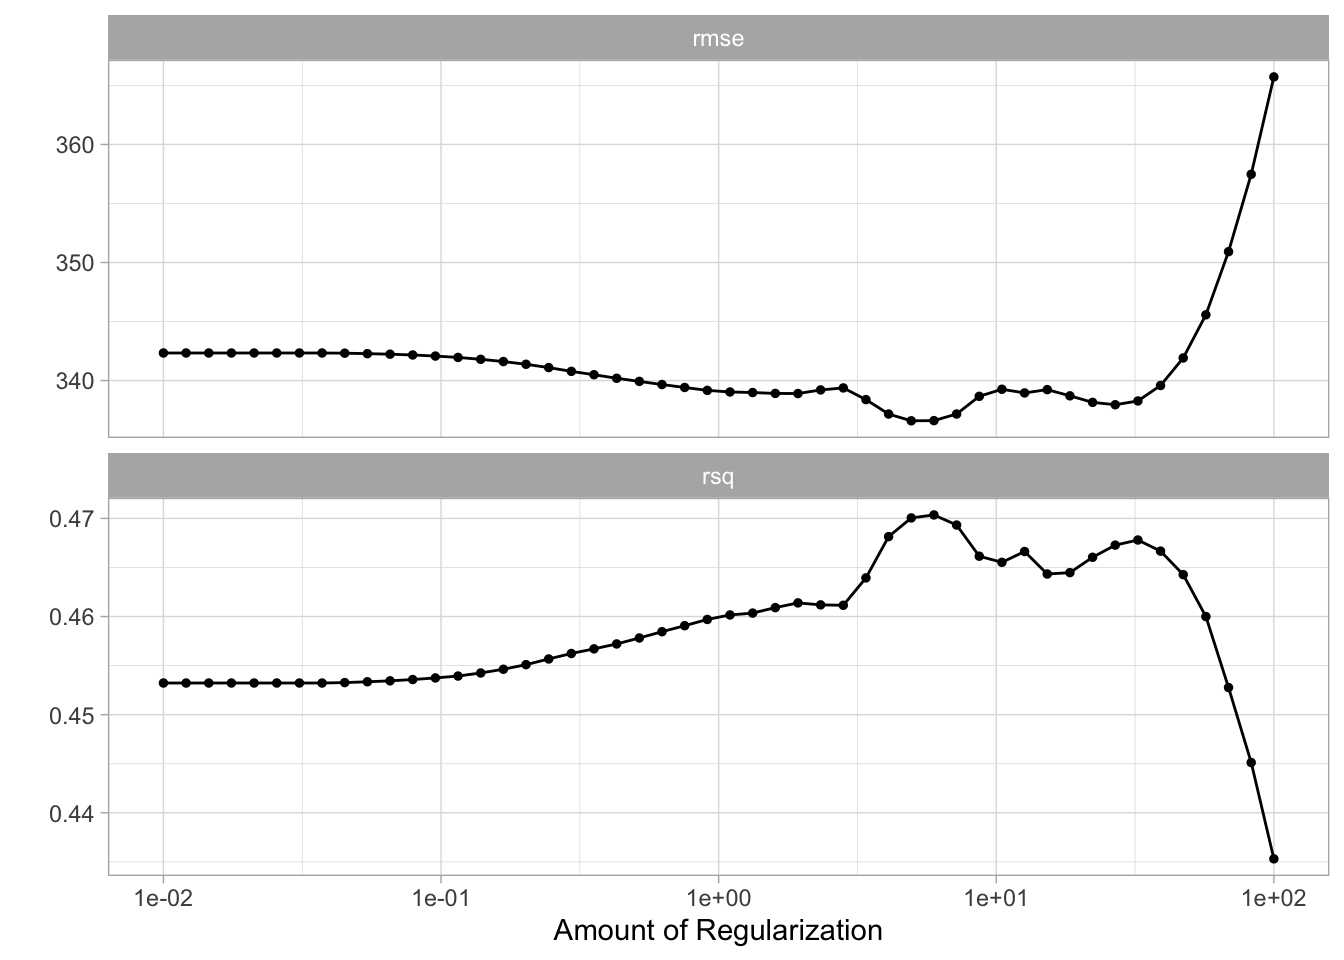 Facetted connected scatter chart. regularization along the x-axis. Performance values along the y-axis. The facets are rmse and rsq. Both are fairly constant for low values of regularization, rmse starts moderately increasing and rsq starts moderately decreasing once the regularization gets larger.